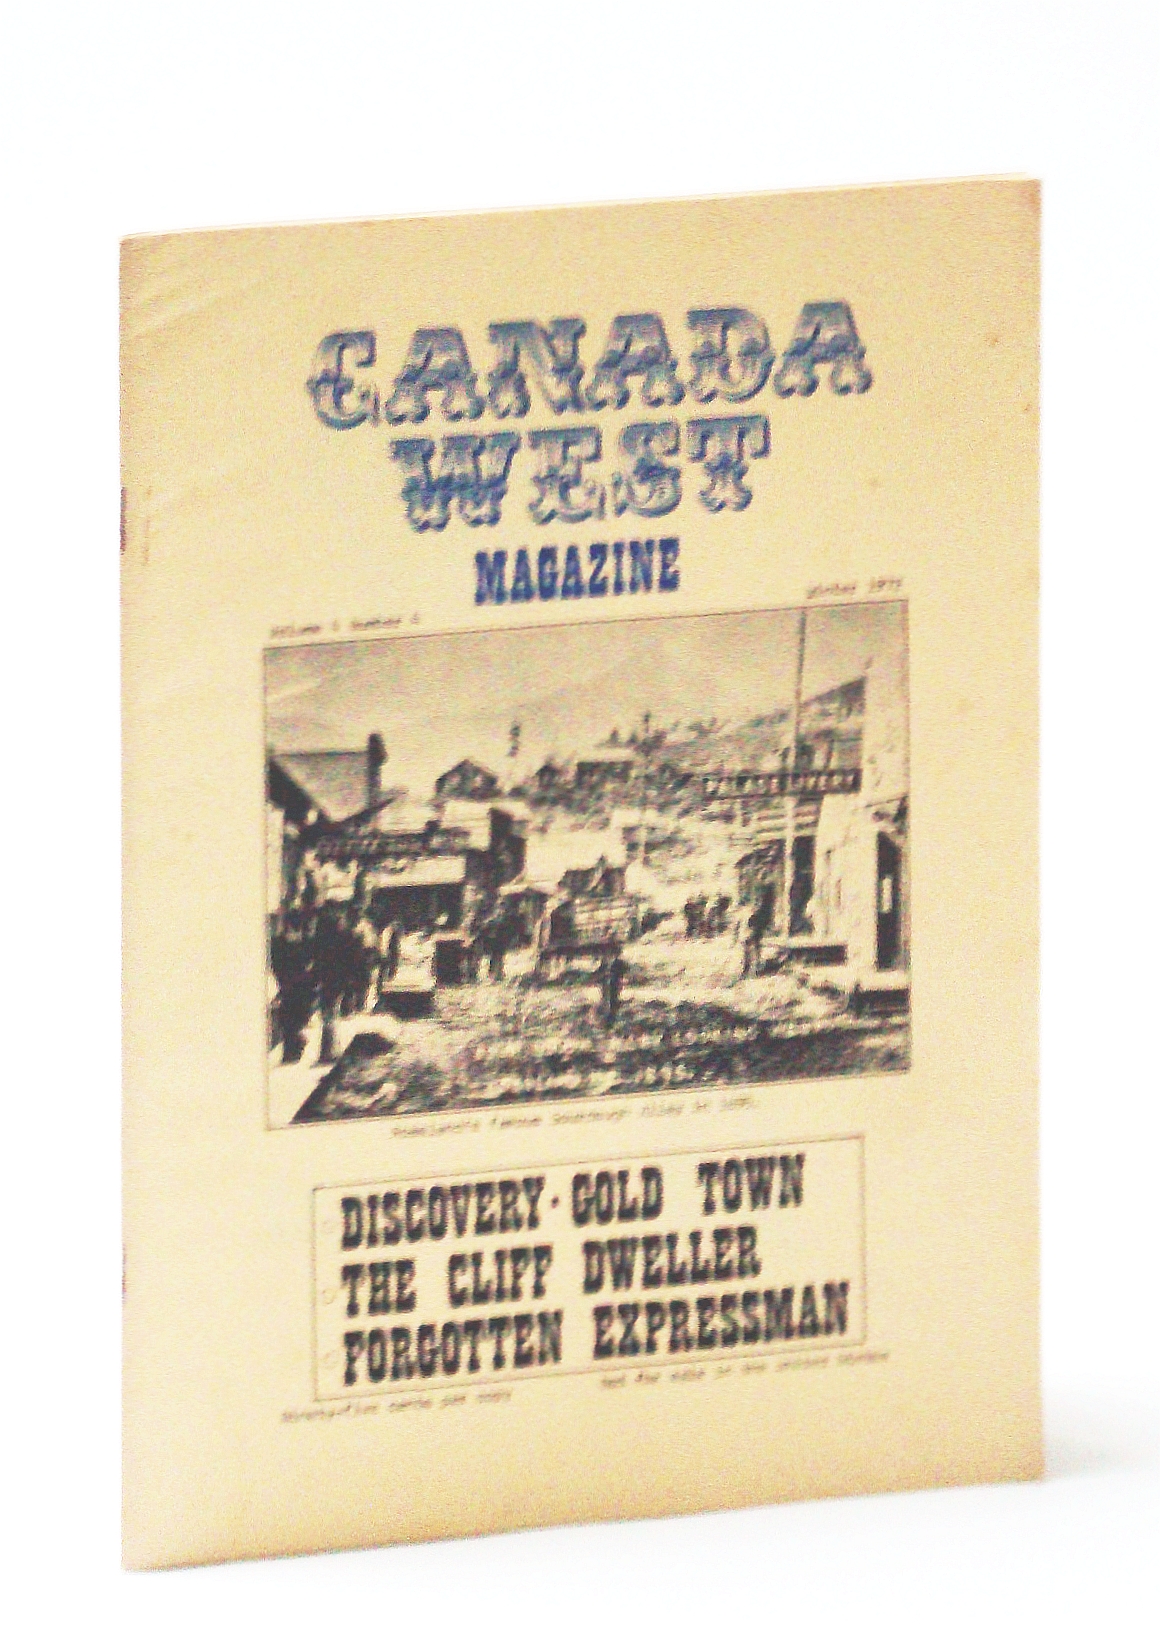 Image for Canada West Magazine, Winter 1972, Volume 4, Number 4 - The Cliff Dweller / The 1913 Liberty Nickel